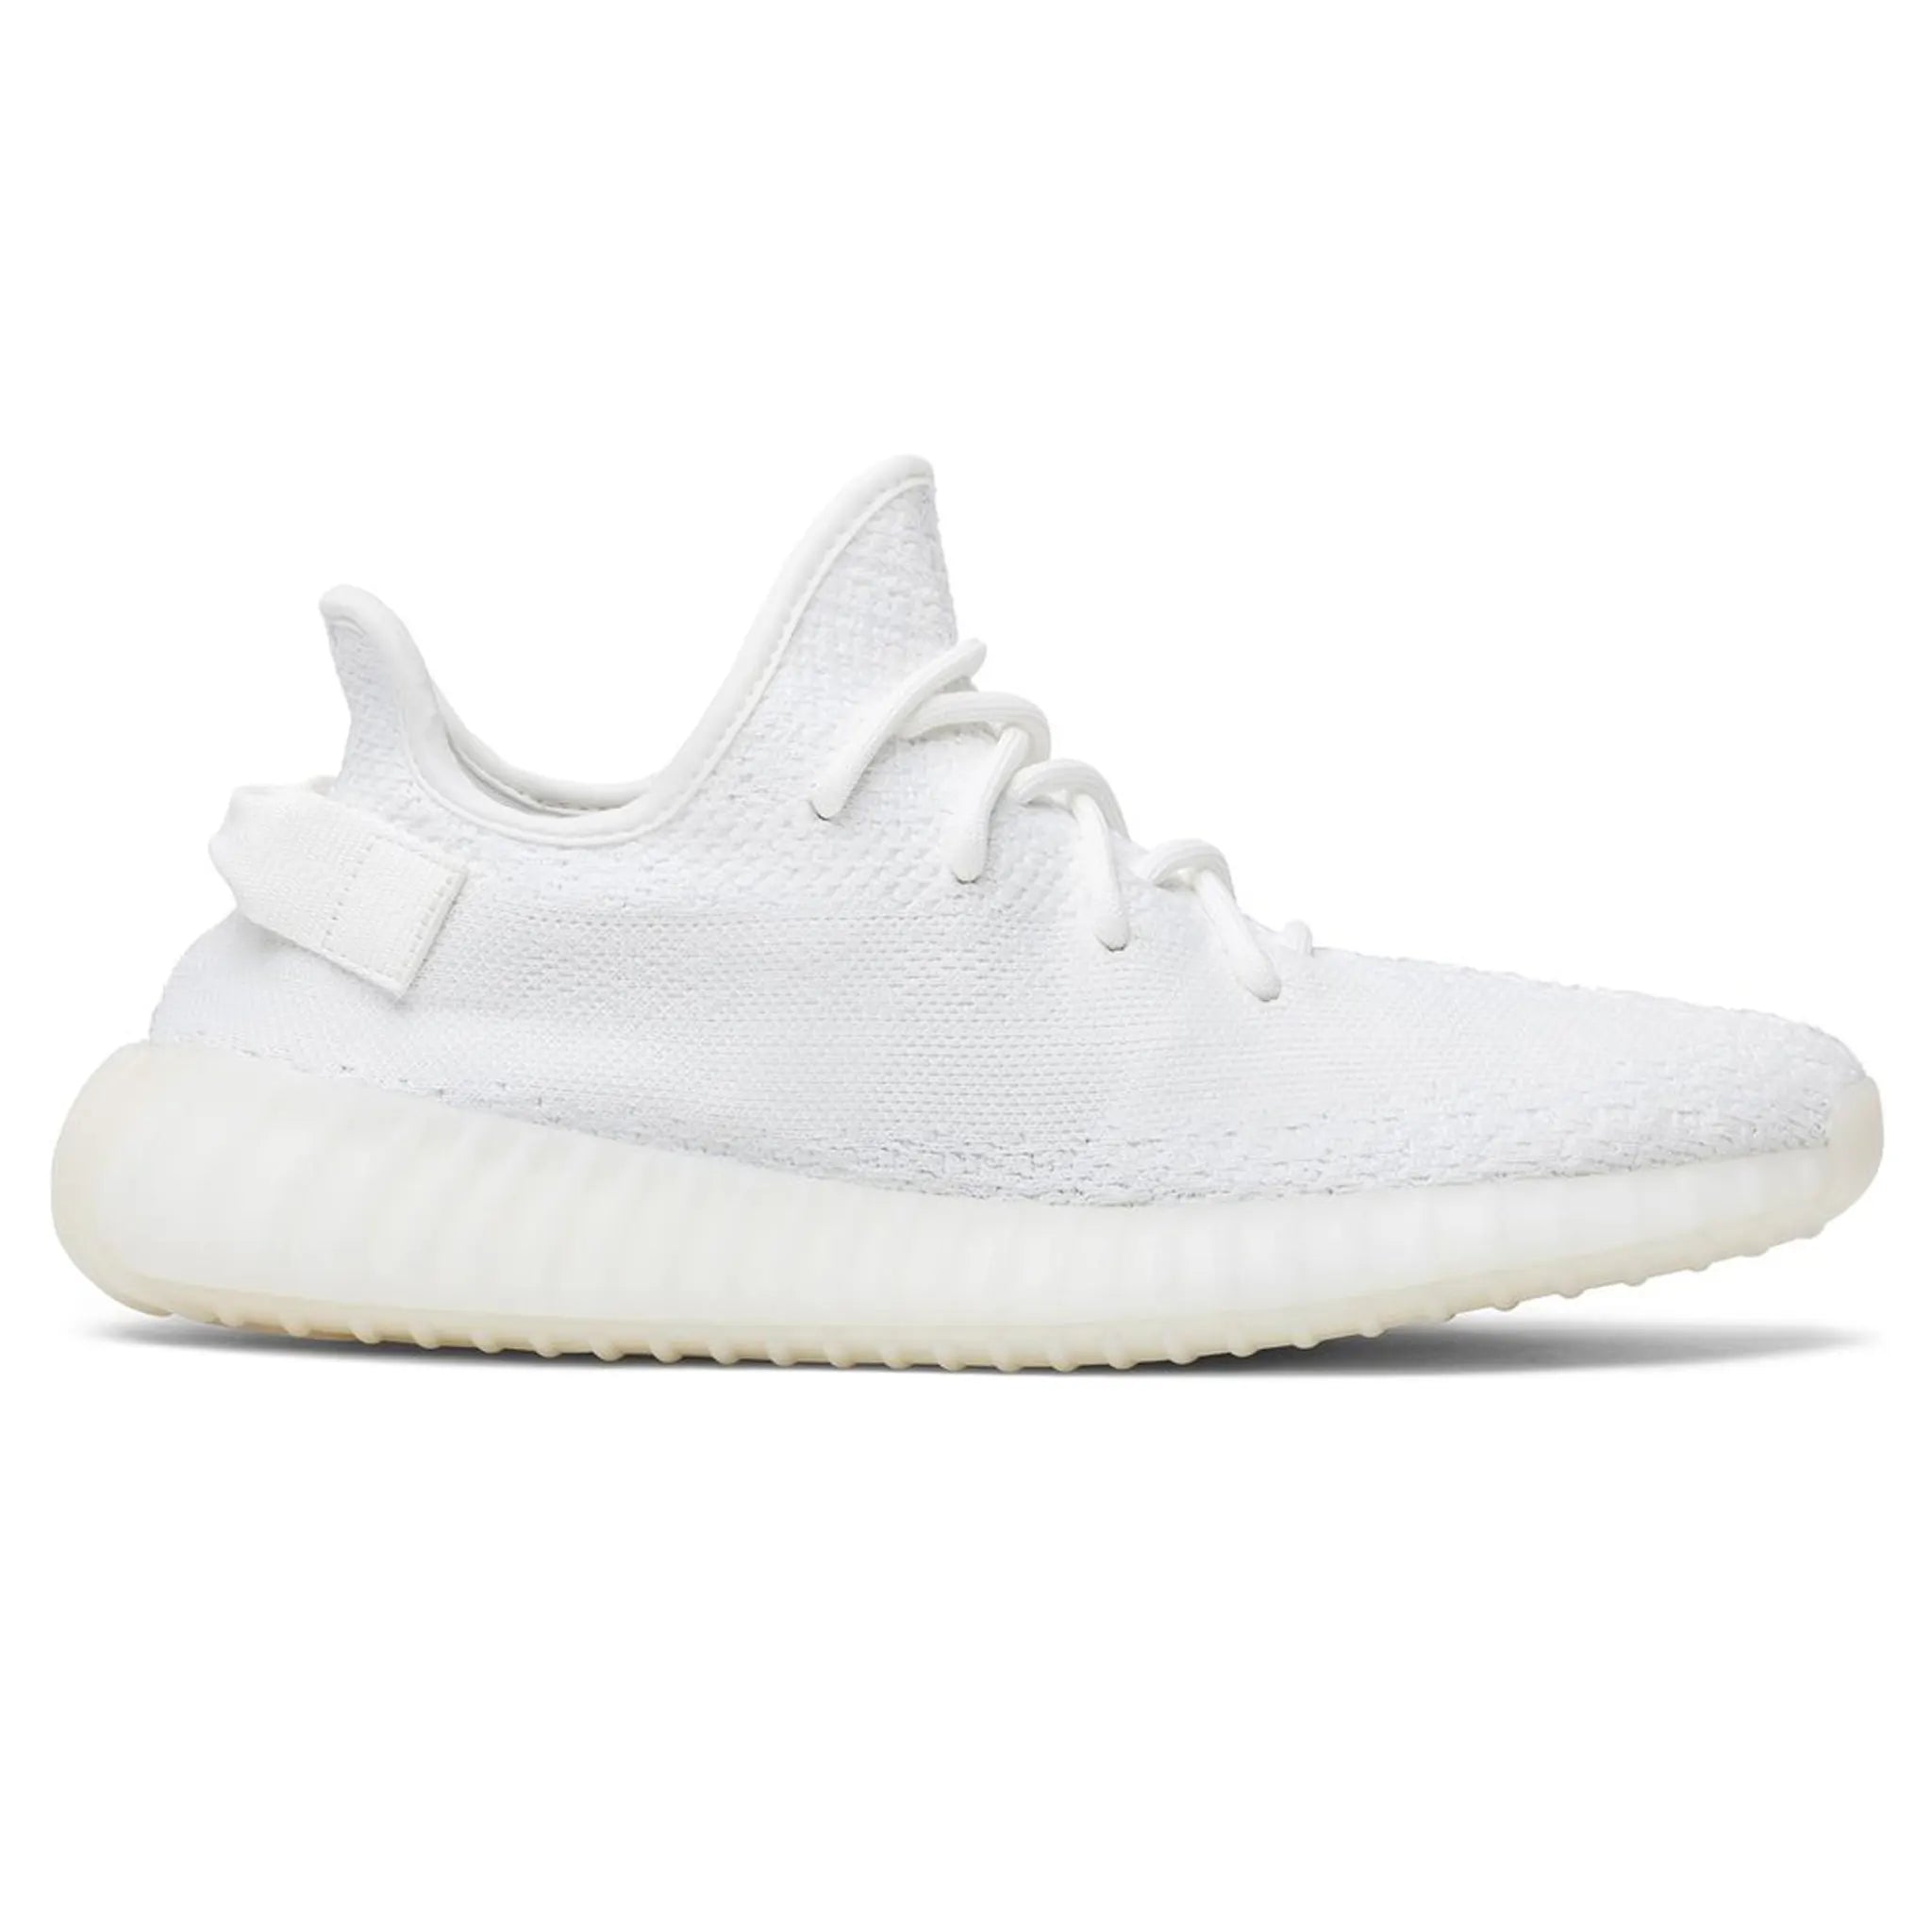 Side view of Adidas Yeezy Boost 350 V2 Cream Triple White CP9366